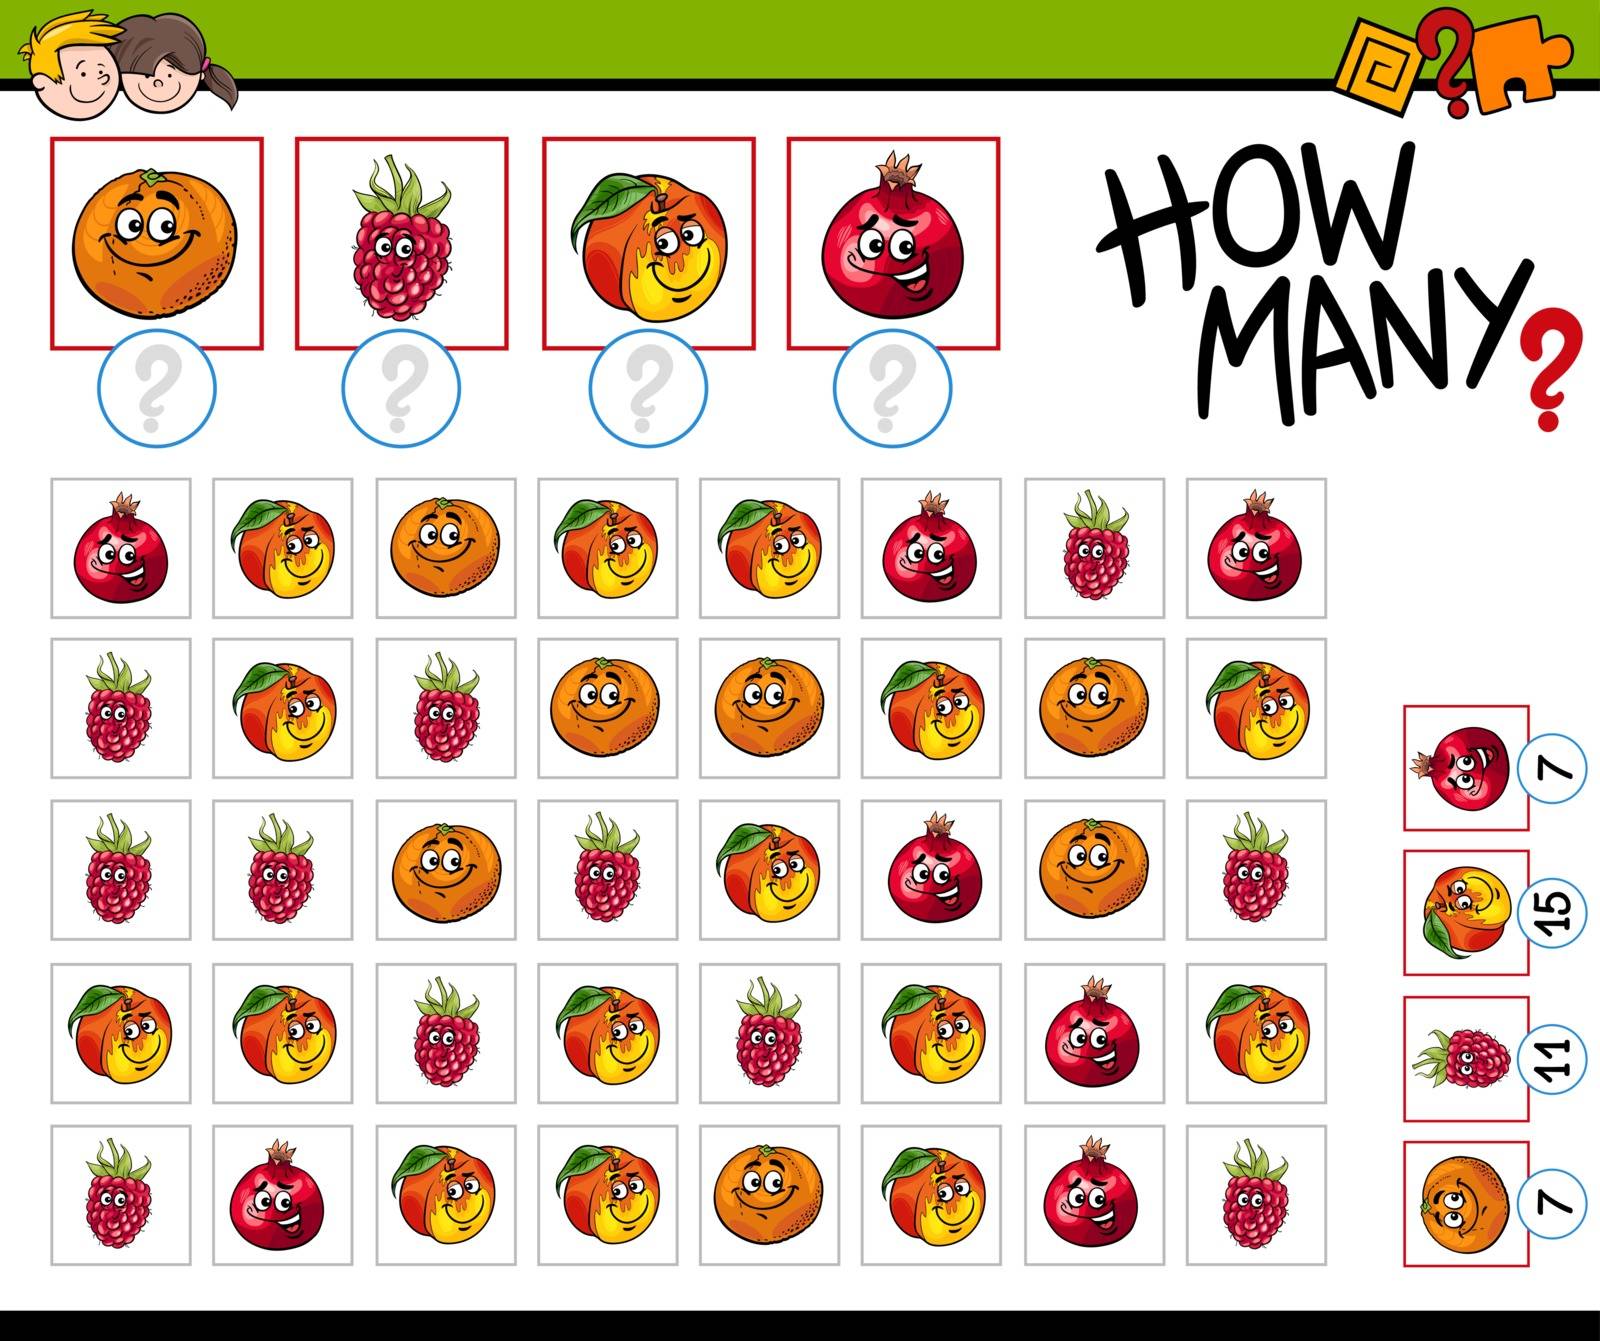 counting activity with fruits by izakowski